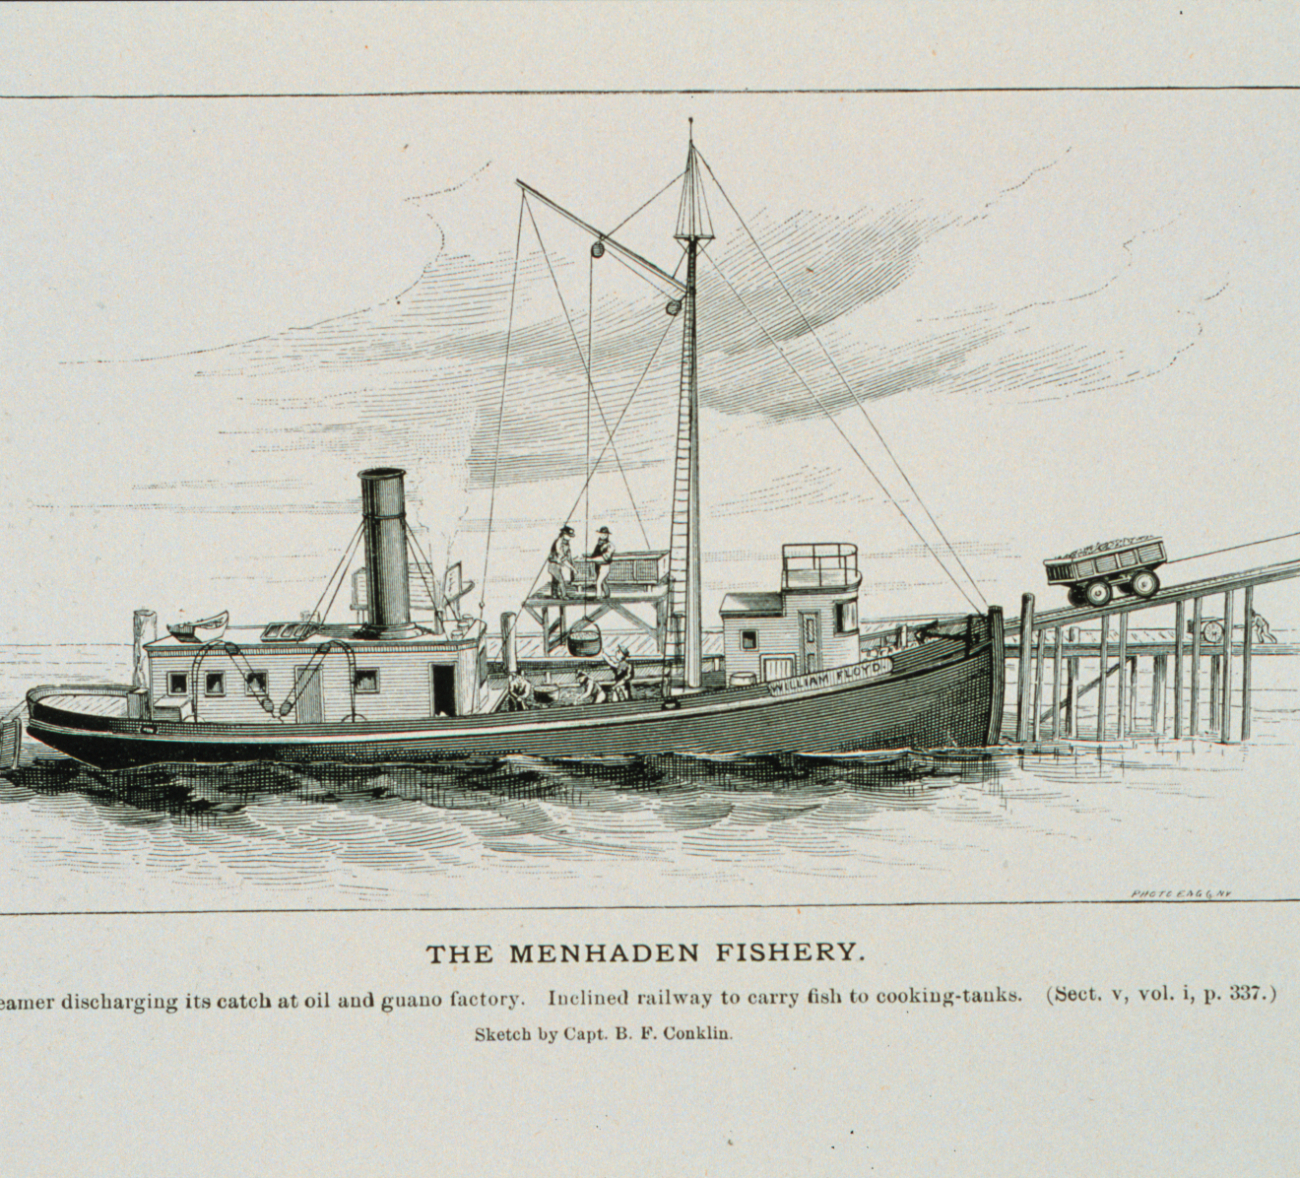 Menhaden steamer discharging its catch at the oil and guano factoryIncline railway to carry fish to cooking tanksFrom a sketch by Capt